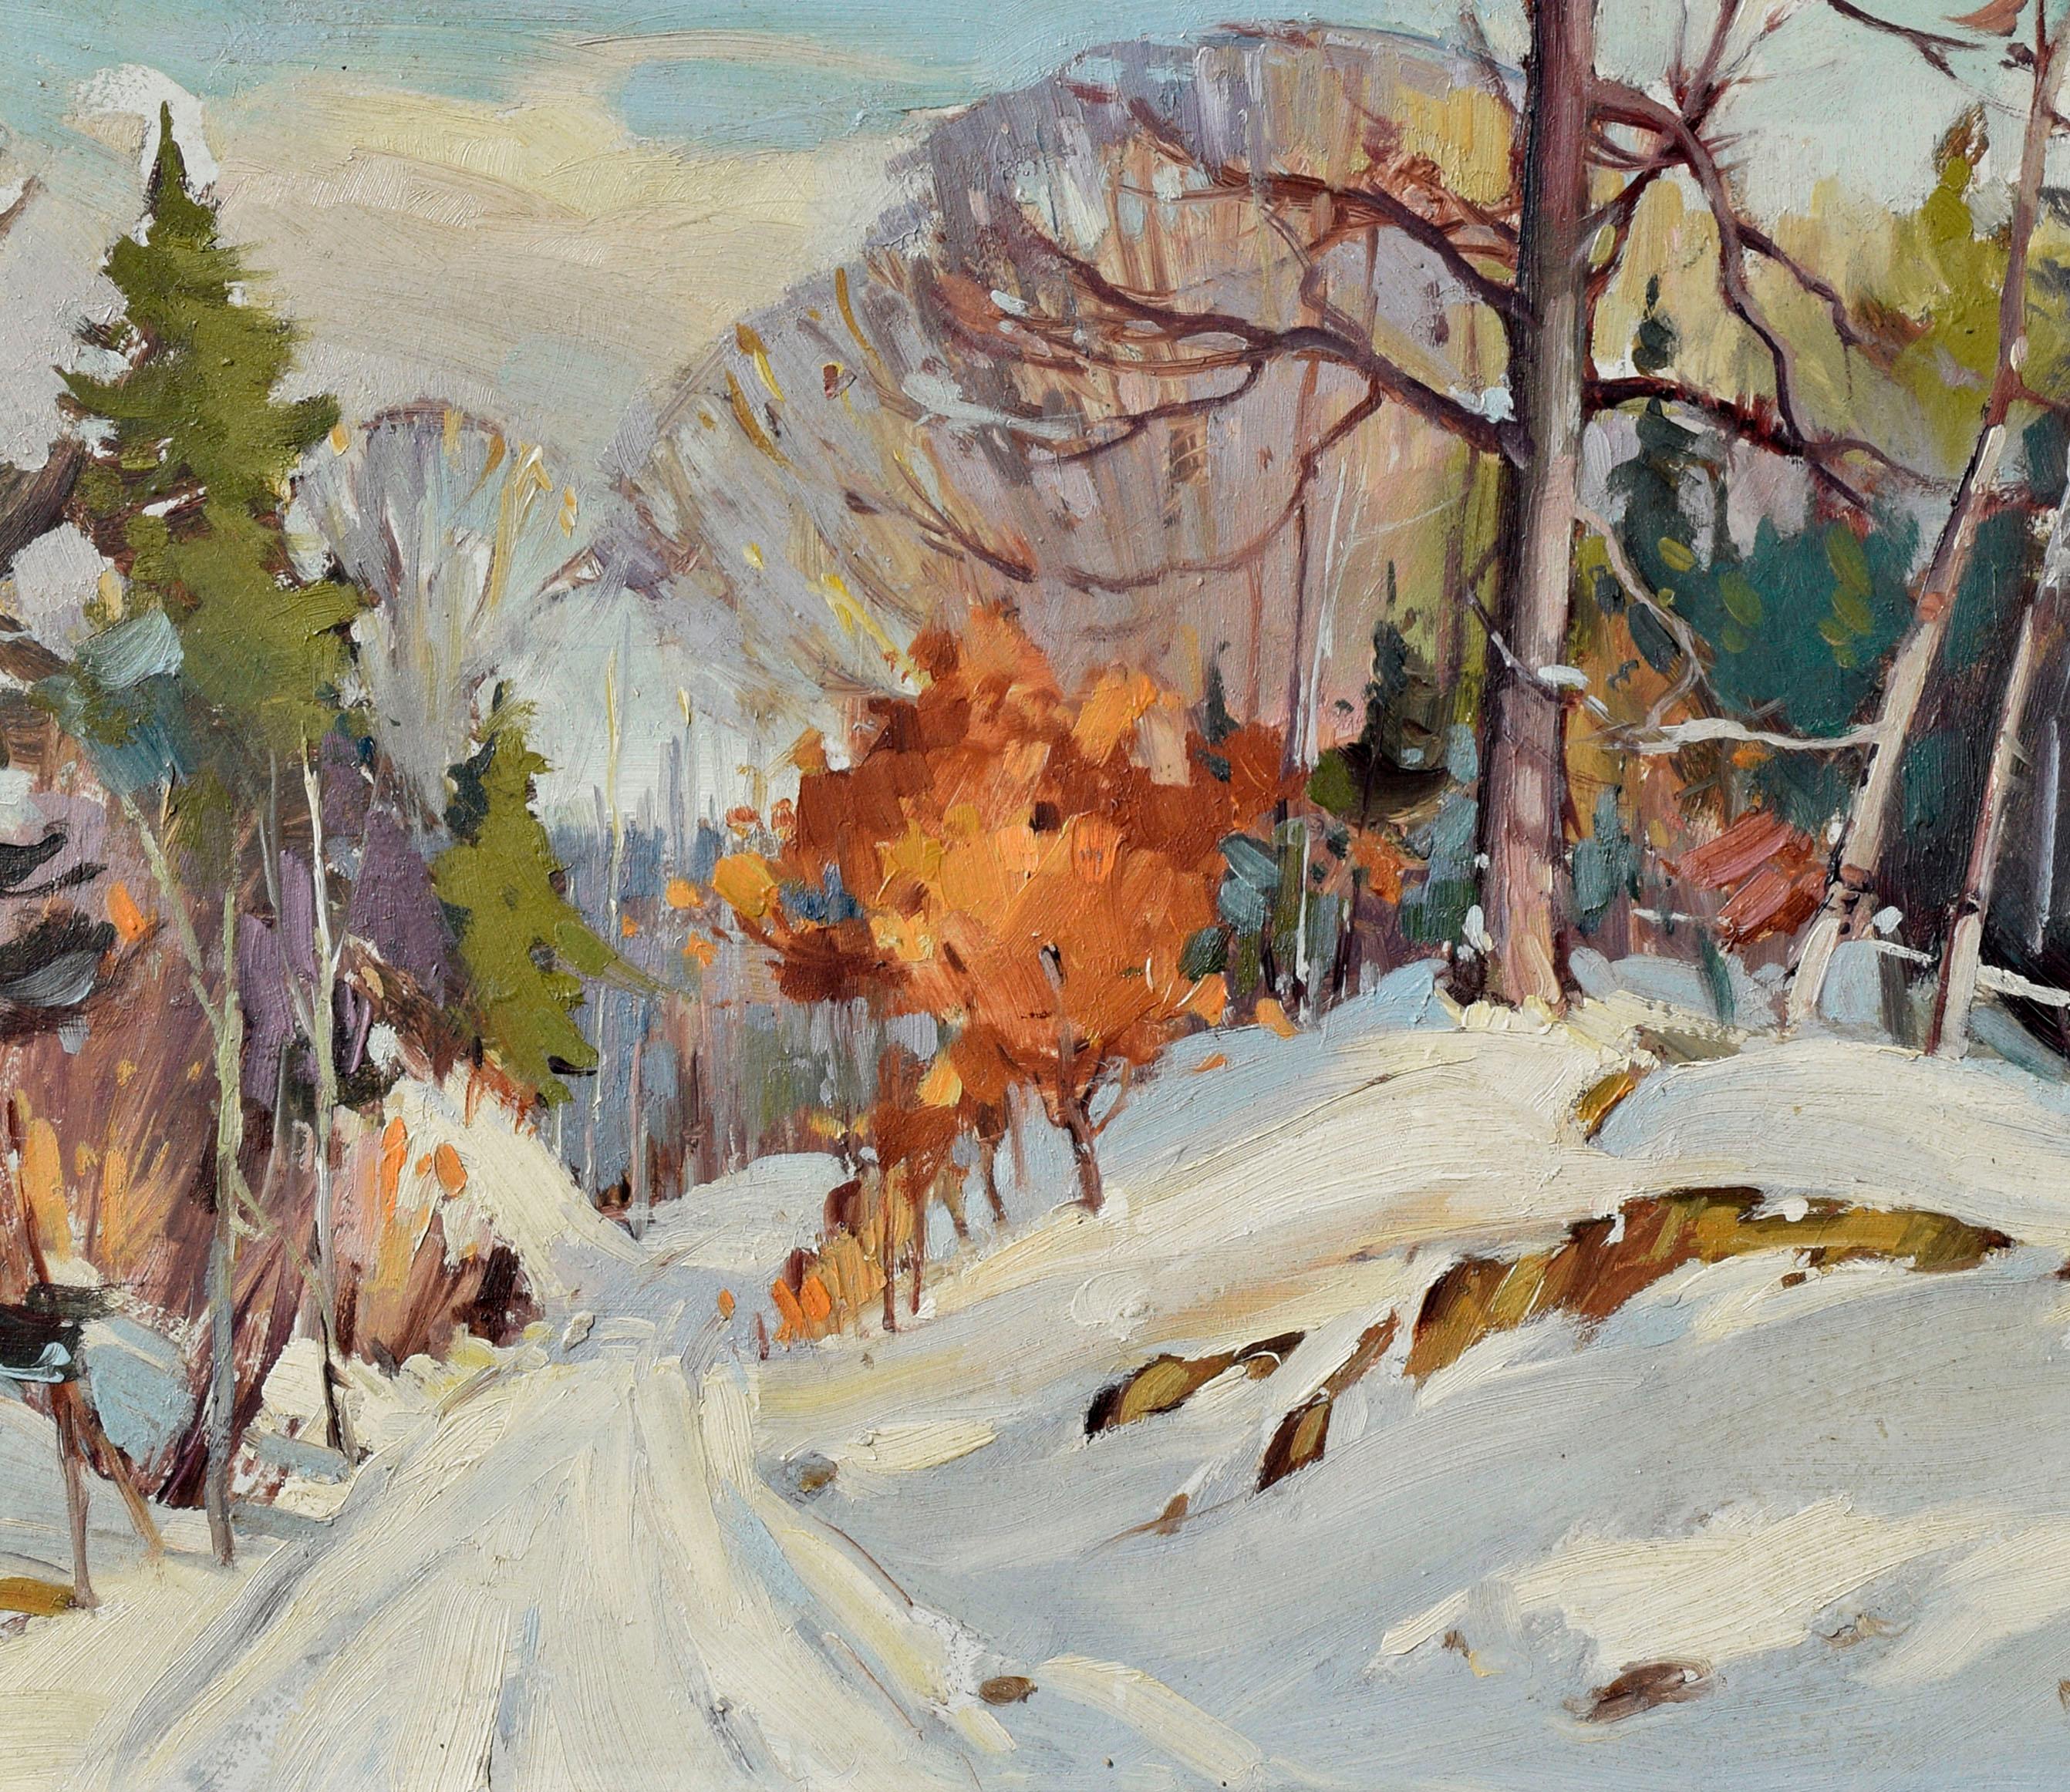 Mountain Road in Winter  - American Impressionist Painting by Stephen Carlton Garris